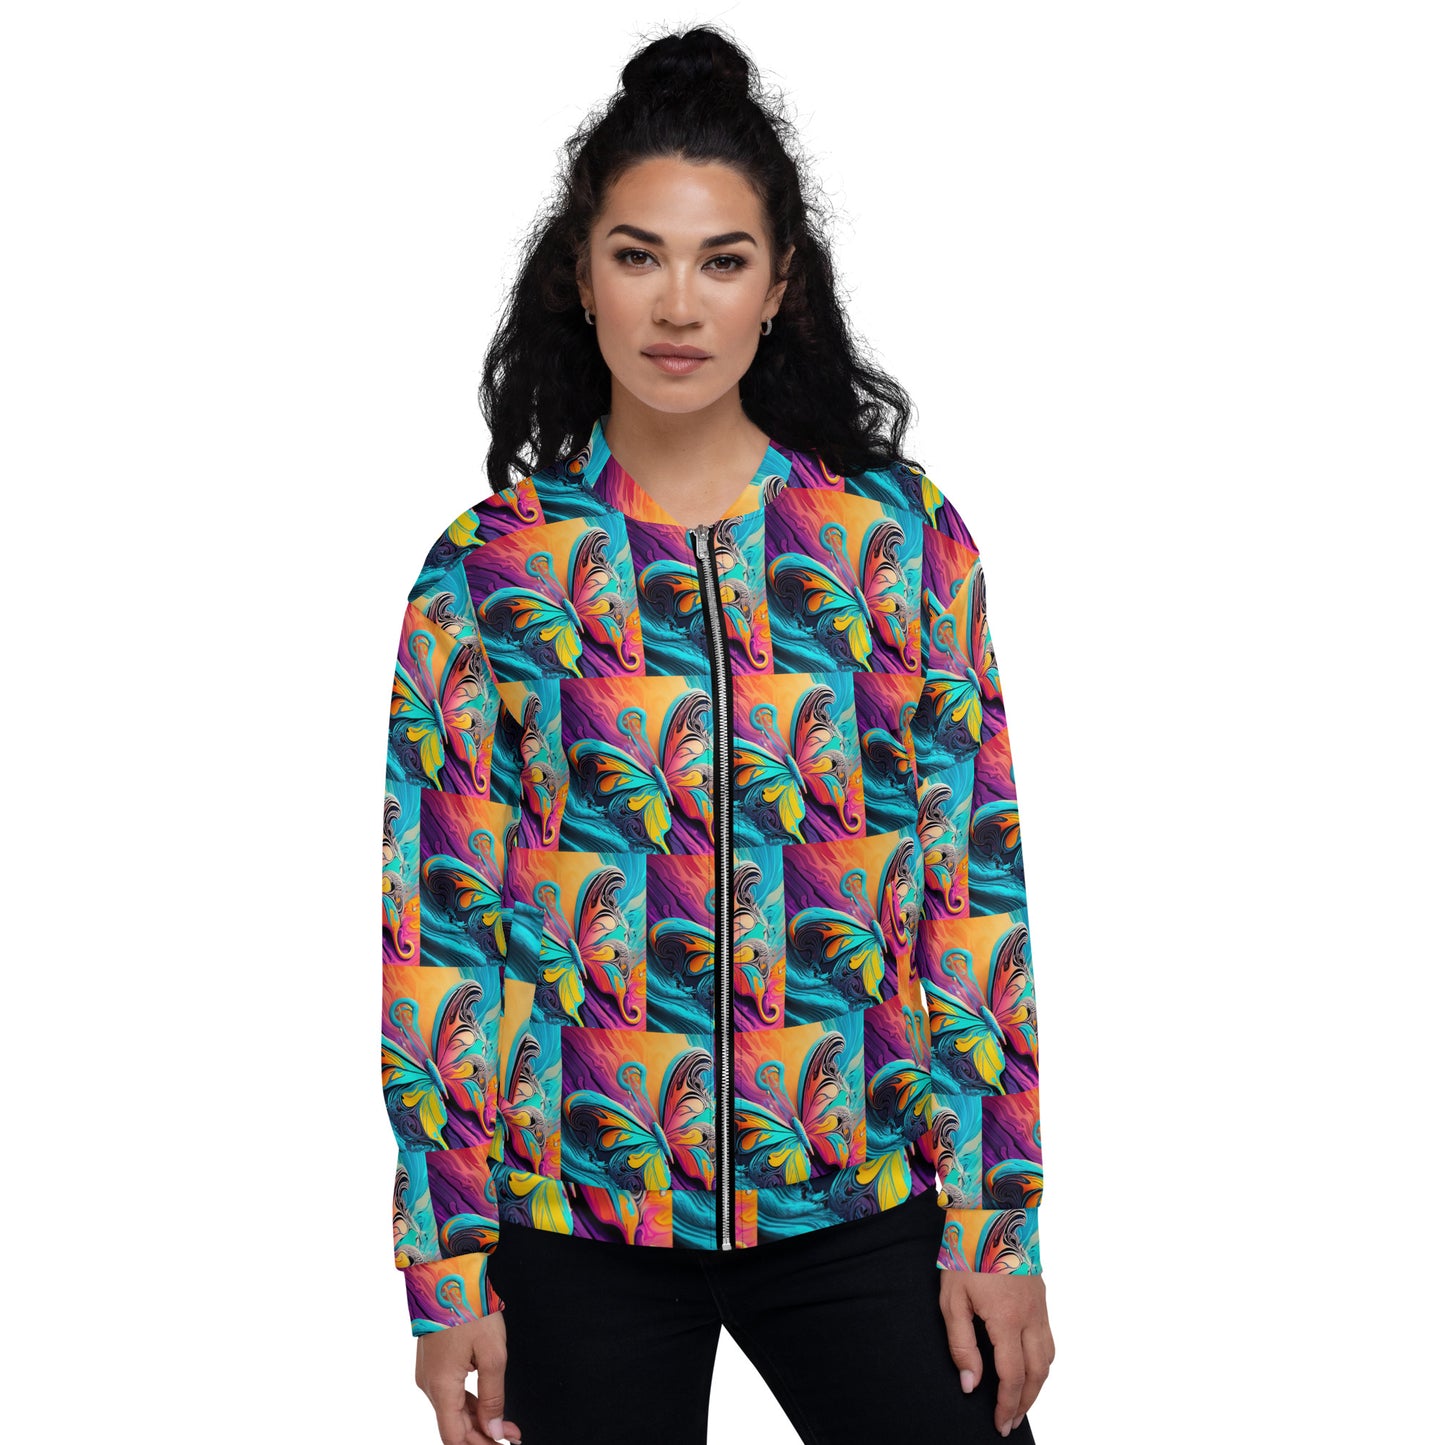 Unisex Bomber Jacket Kukloso Cubist Faces No 21 Fantastical Butterflies Free Shipping